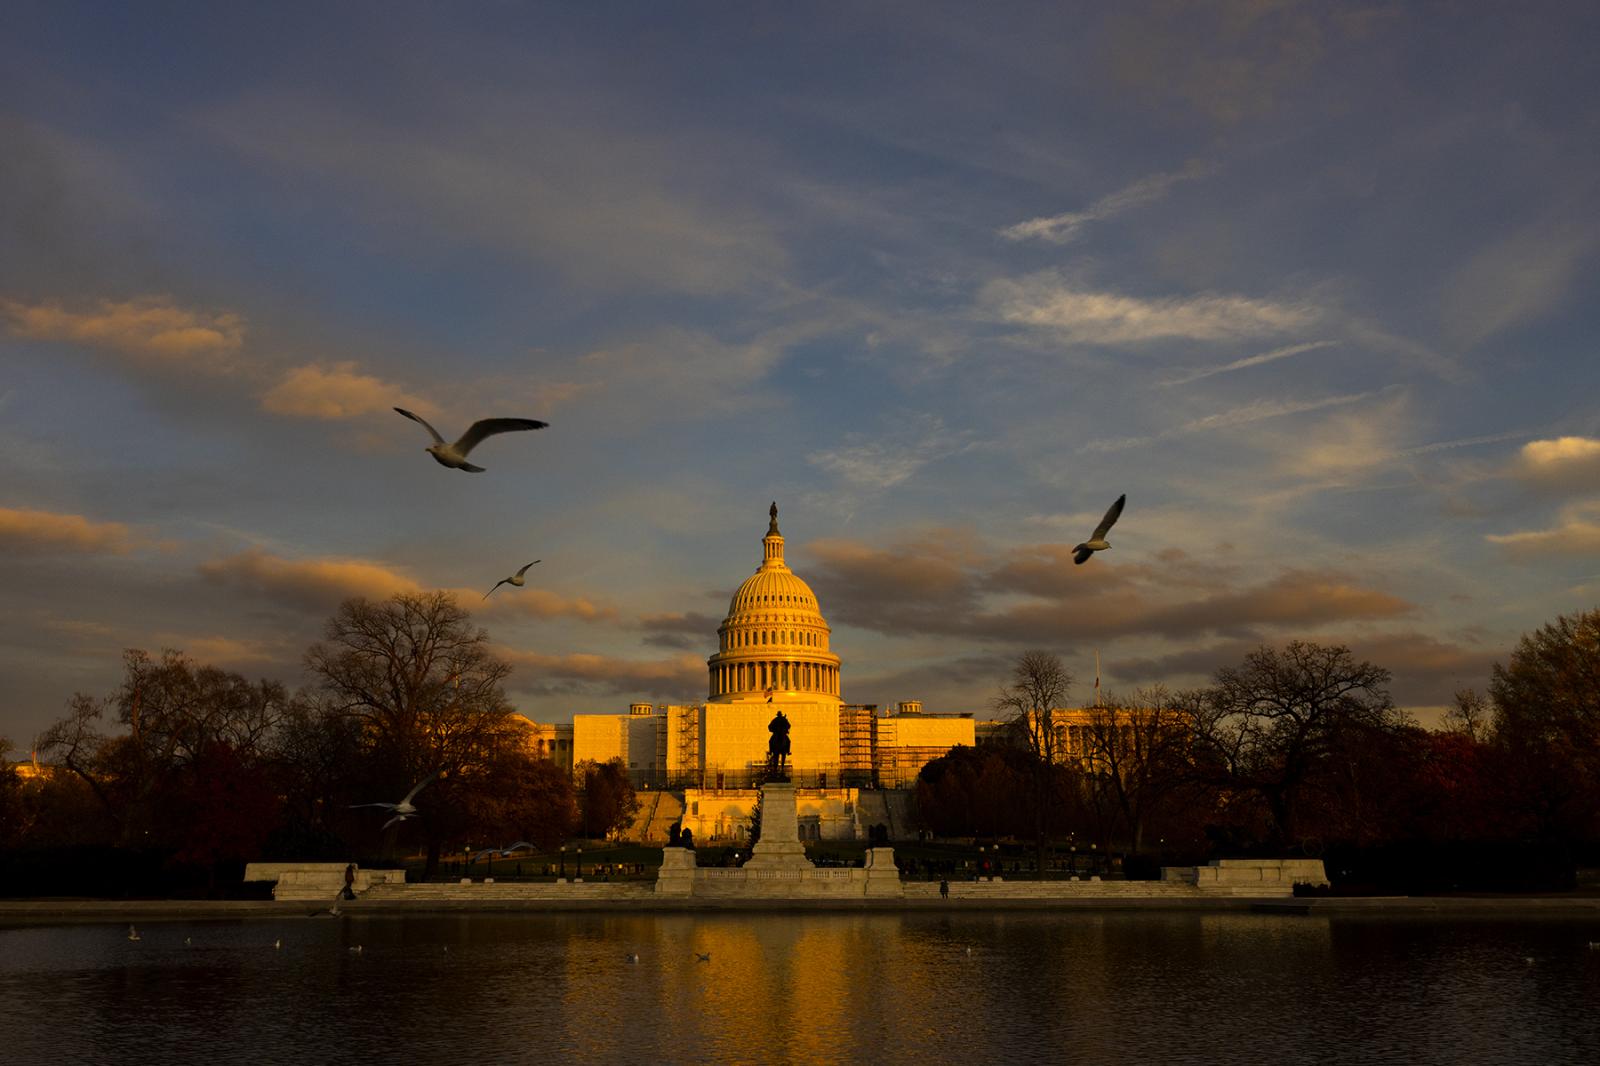 The U.S. Capitol Building at sunset on November 19, 2022.